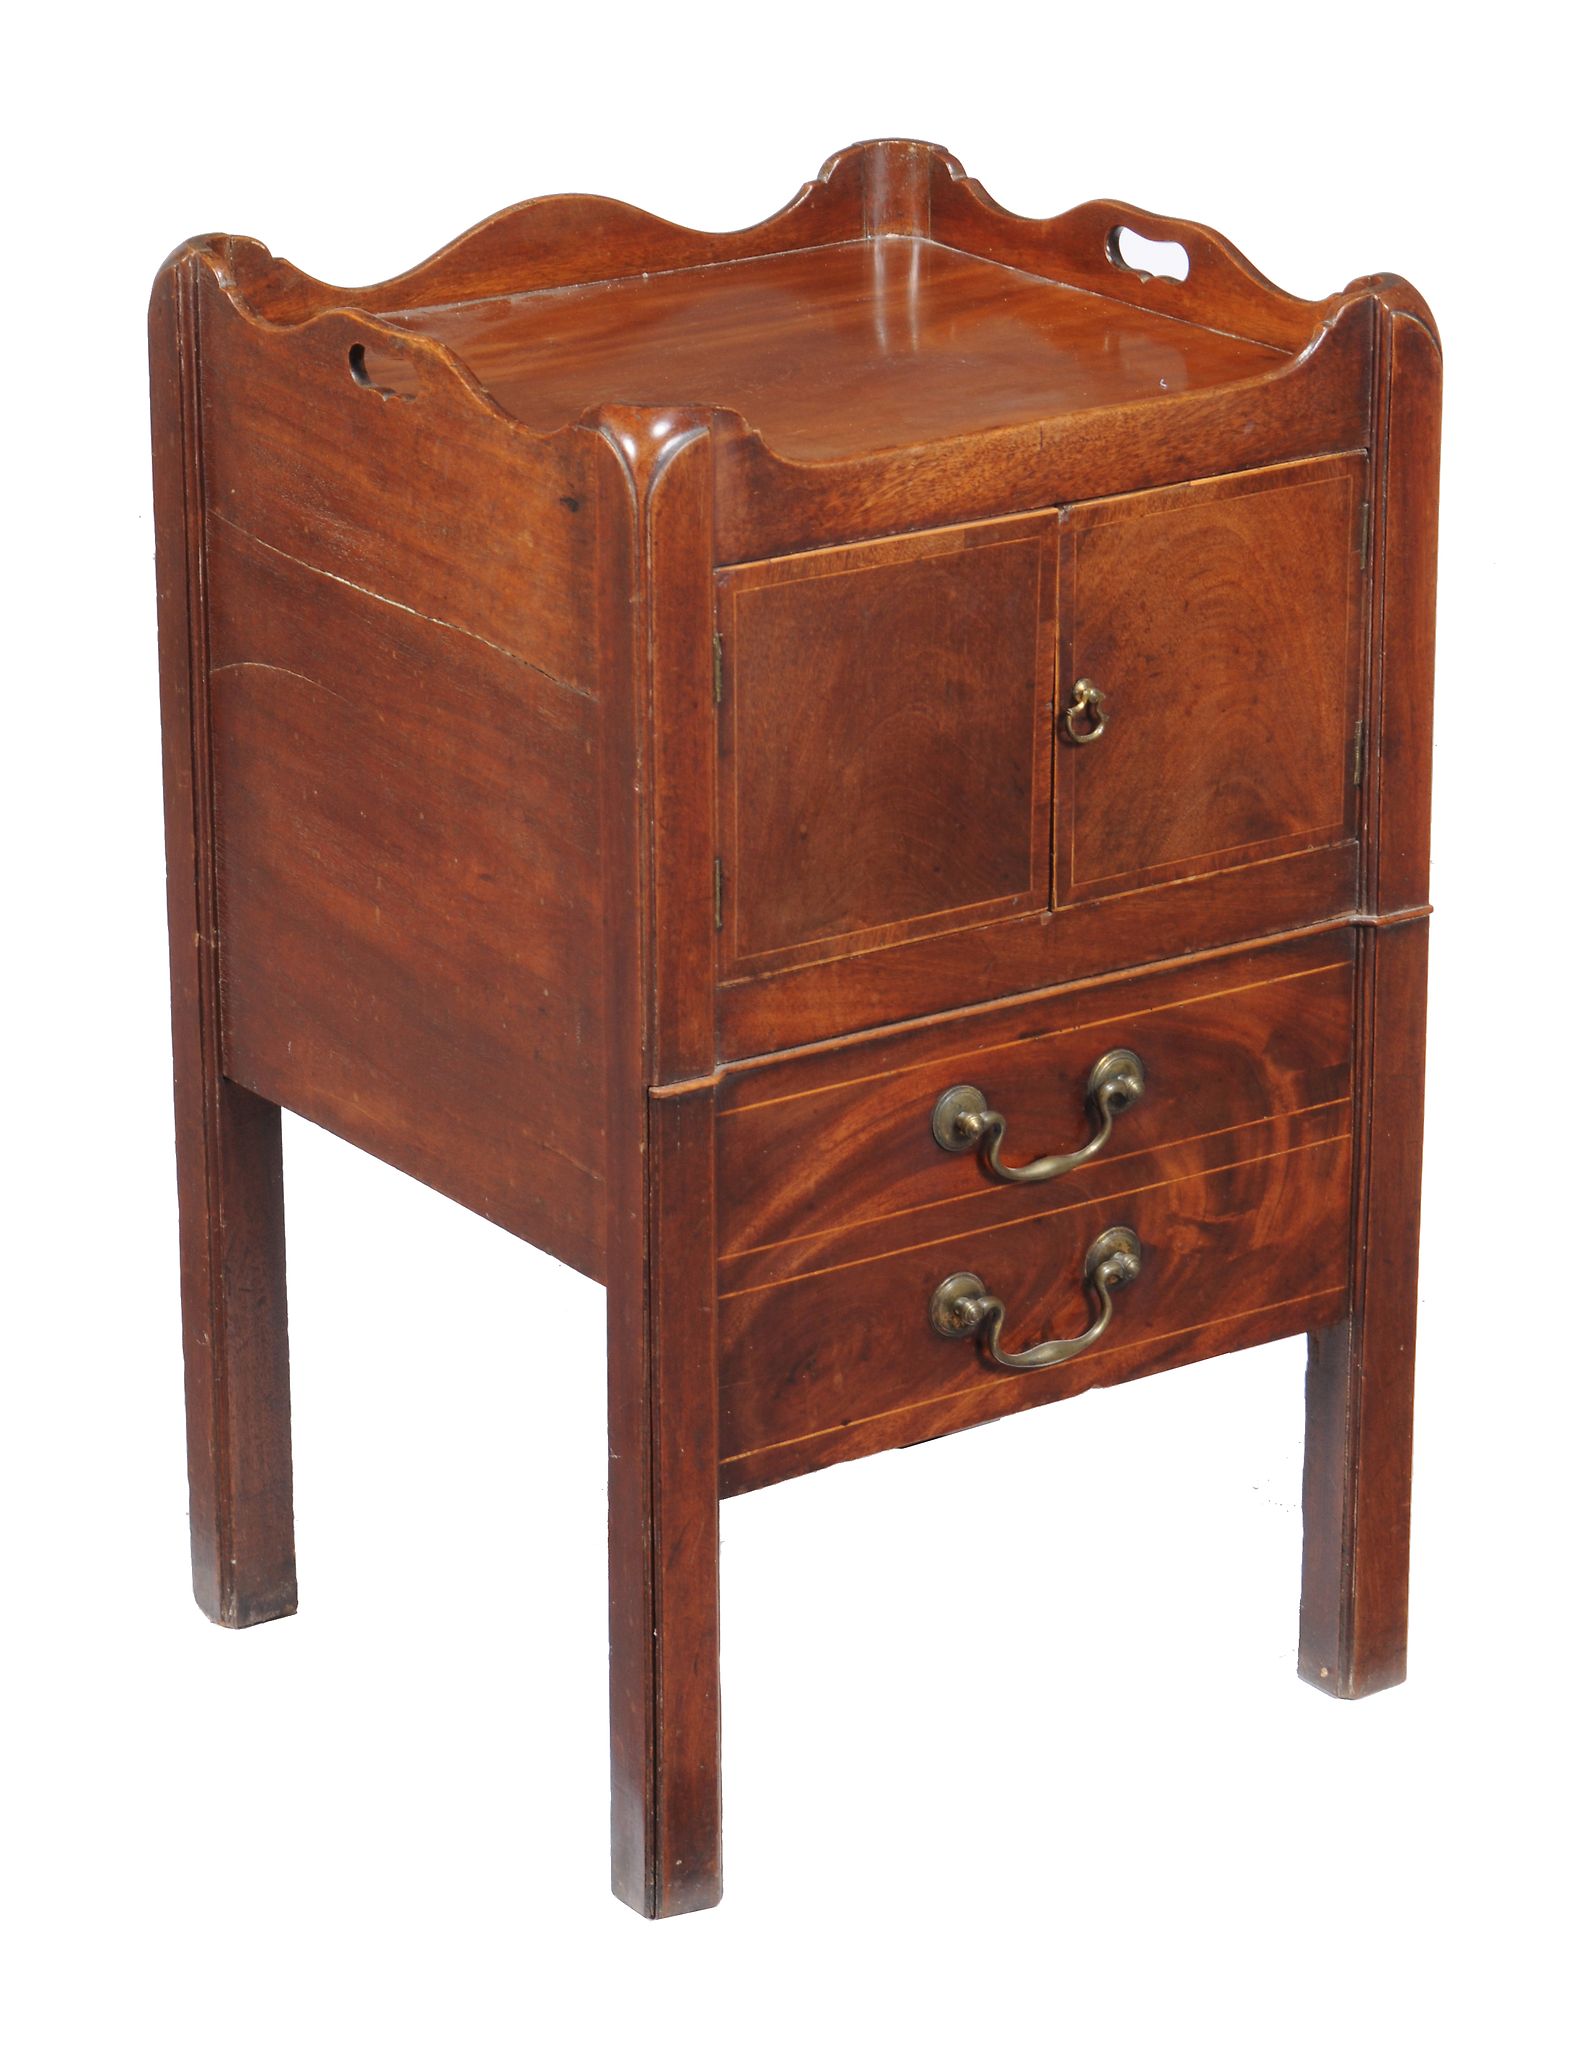 Two similar George III mahogany bedside commodes , circa 1780, each with tray top above cupboard - Image 2 of 2